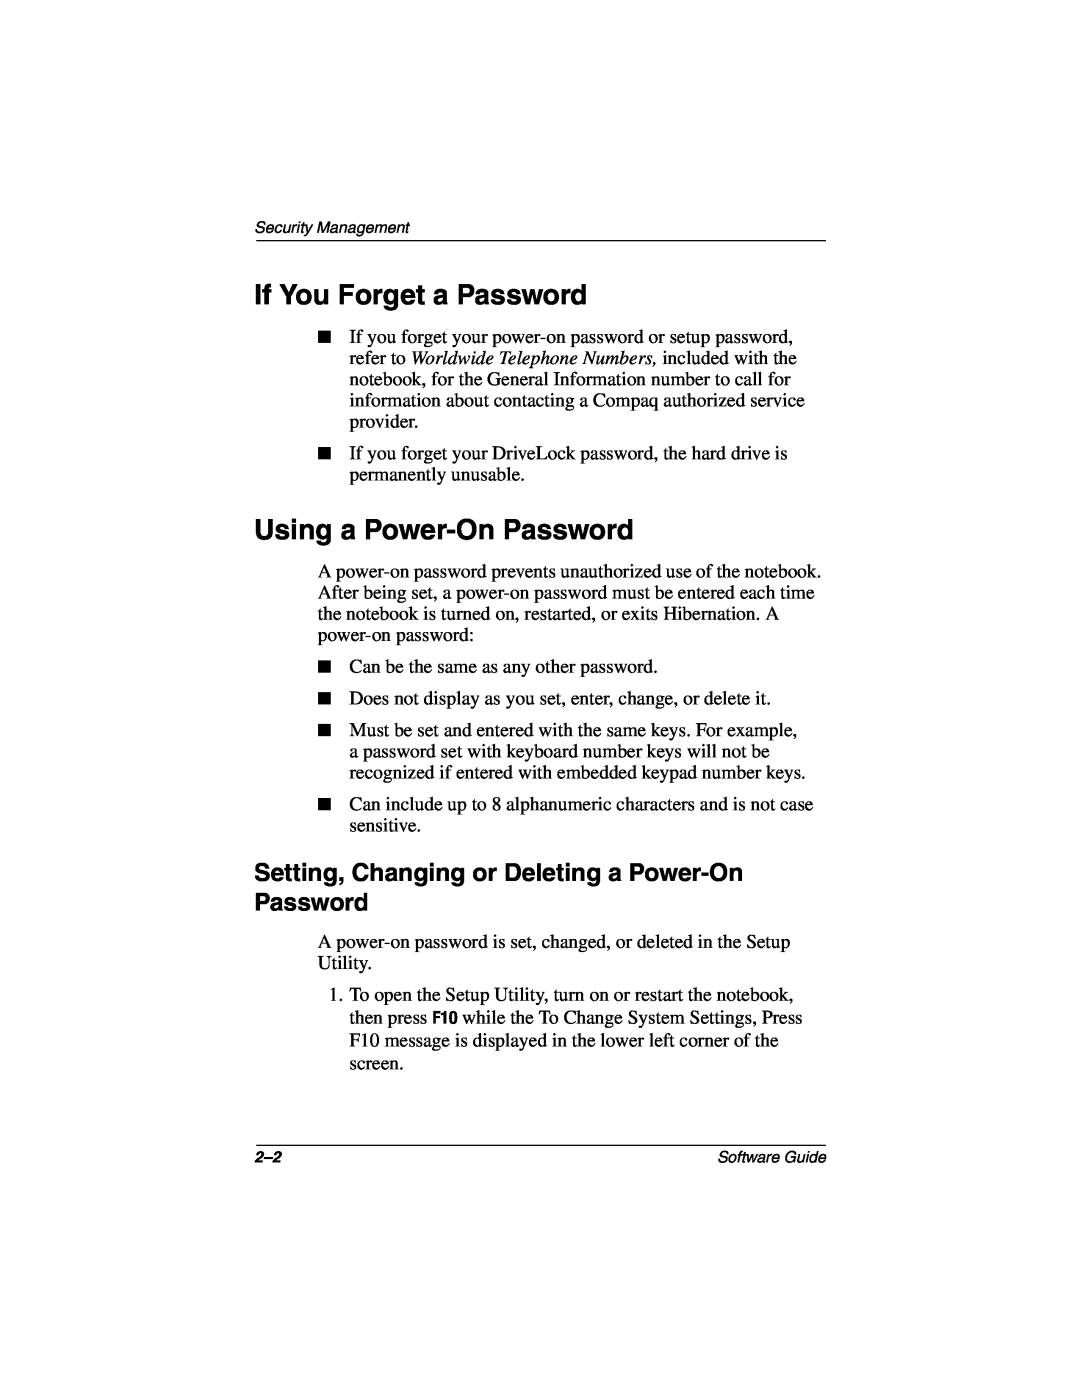 HP 903EA, 955AP If You Forget a Password, Using a Power-On Password, Setting, Changing or Deleting a Power-On Password 